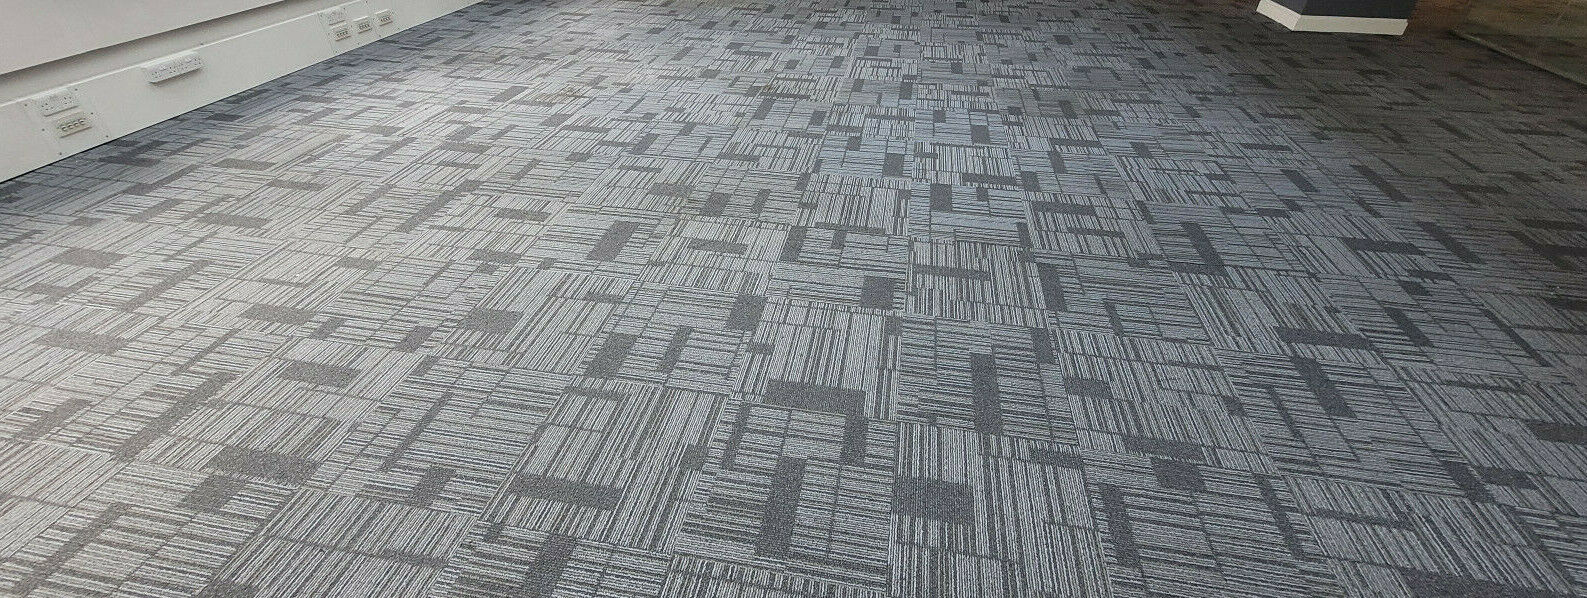 22x Interface CARPET TILES great condition